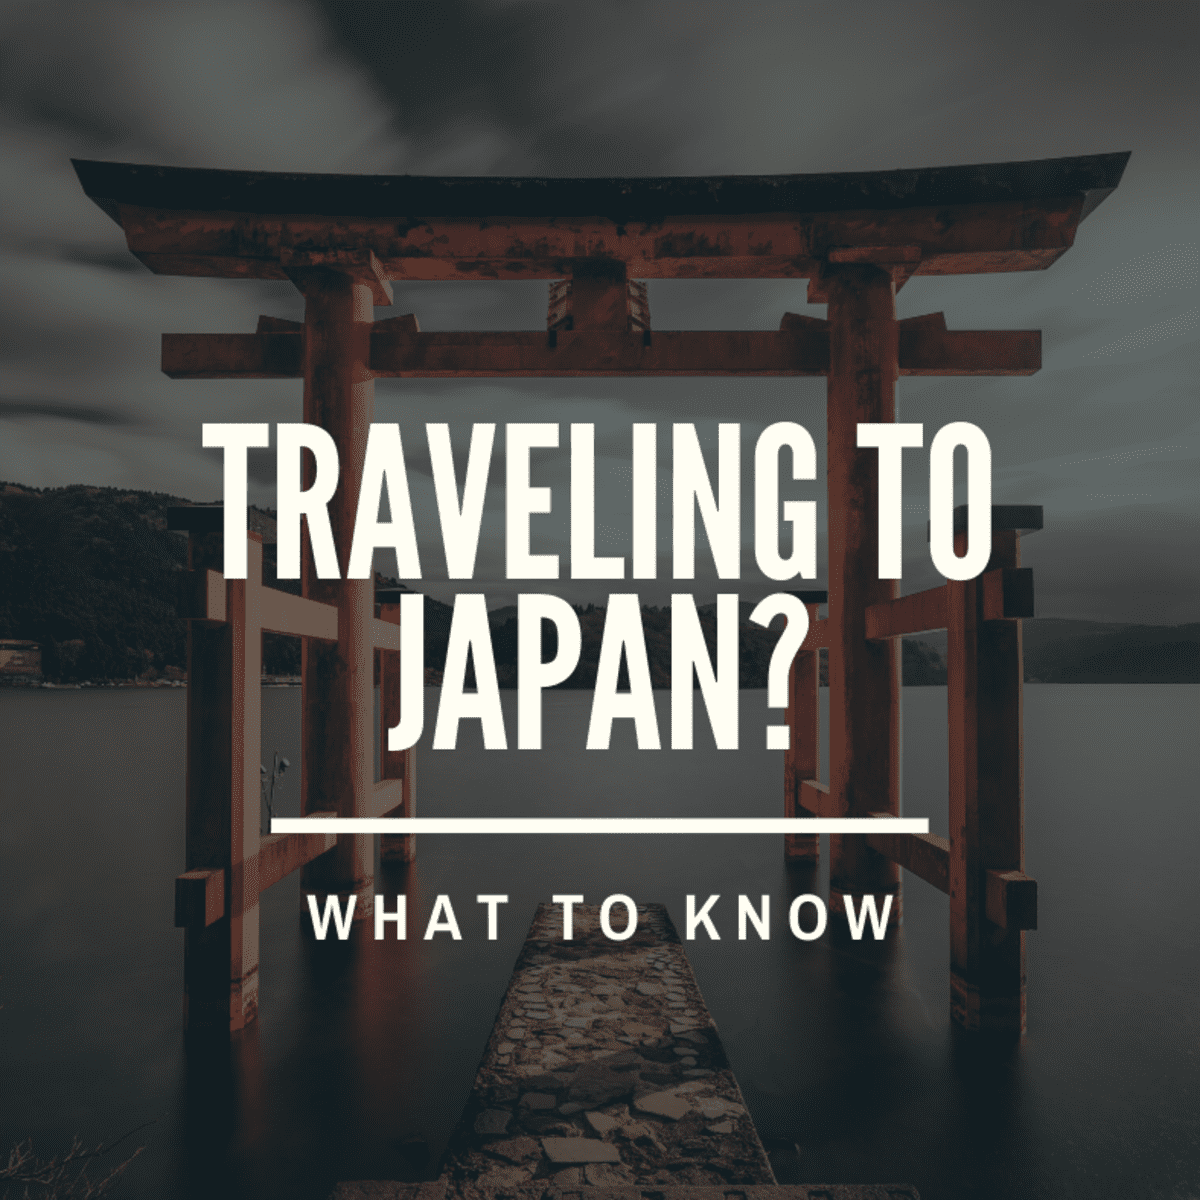 14 Things Tourists Should Know Before Visiting Japan